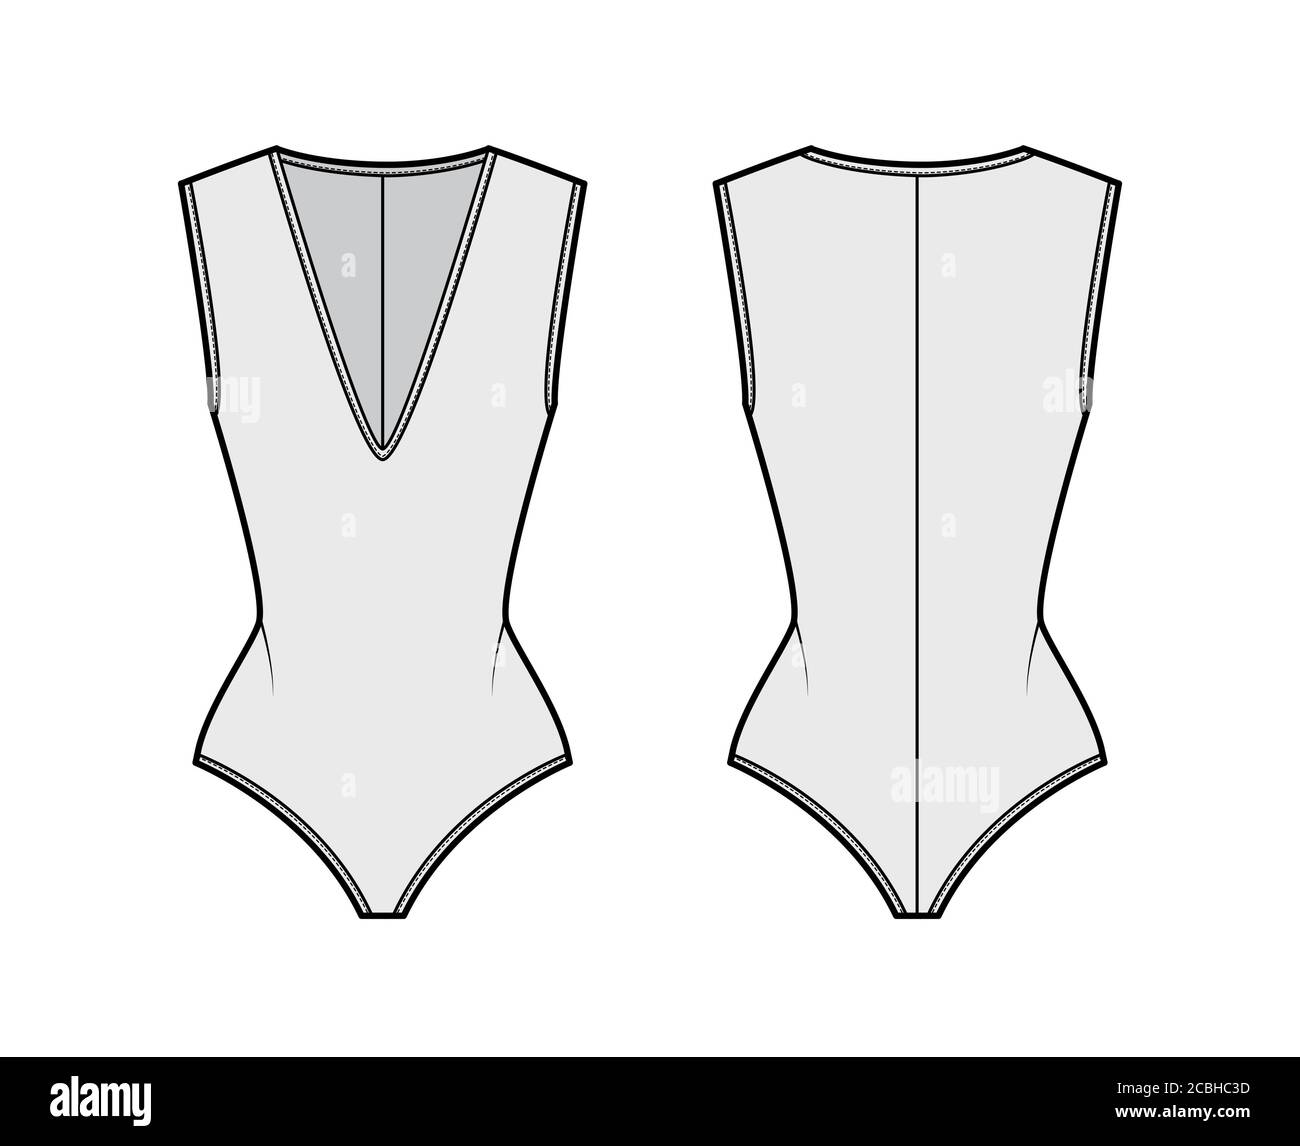 Black one piece swimsuit Stock Vector Images - Alamy